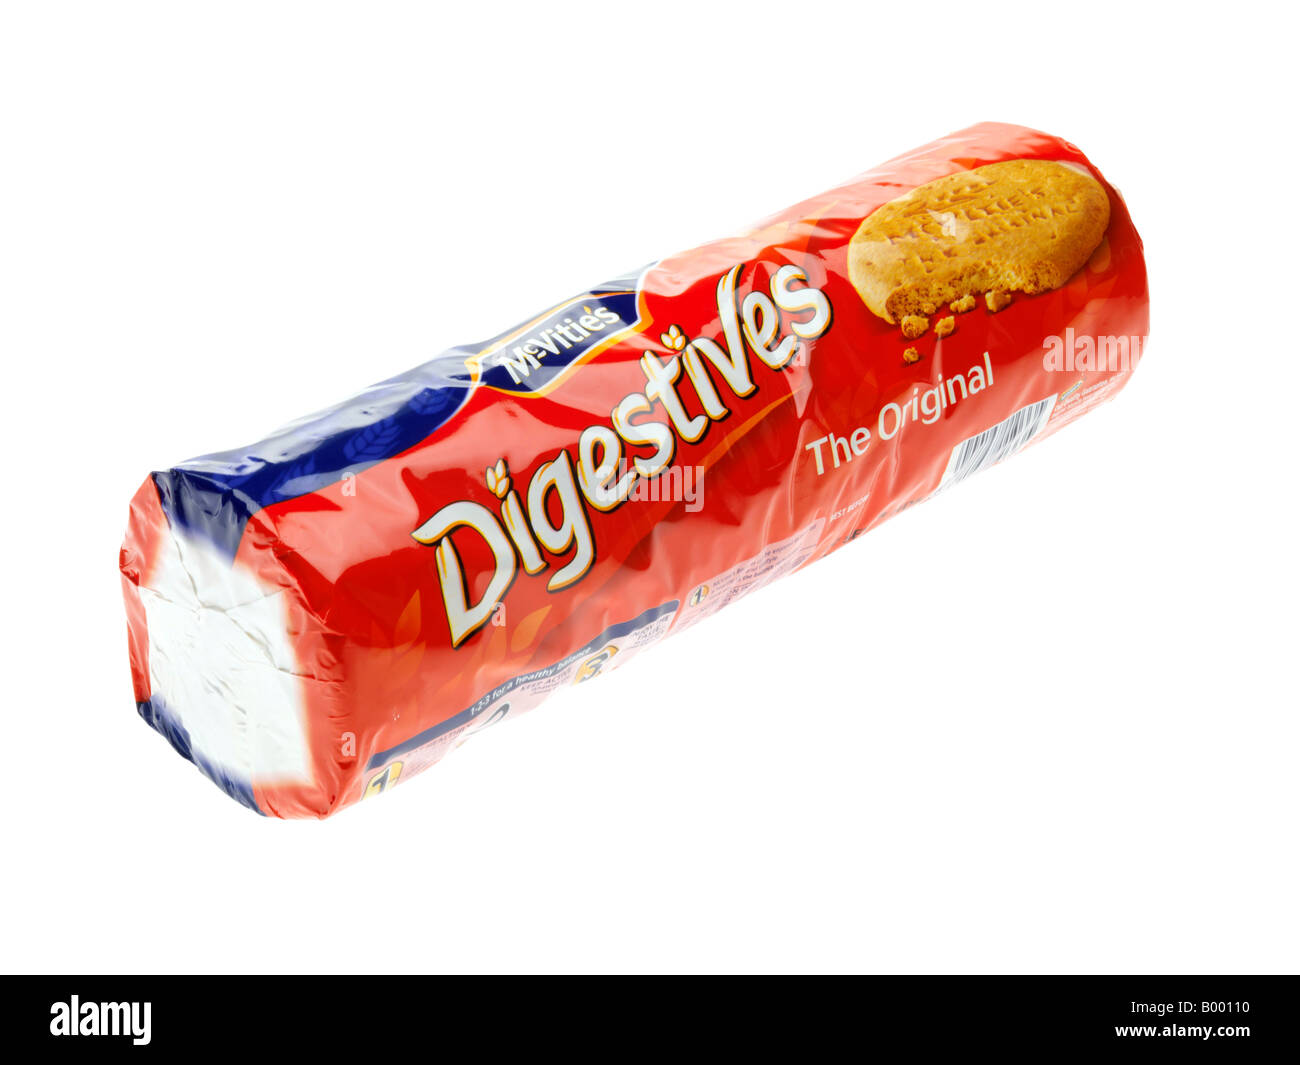 Branded Packet Of Original Plain McVitie's Digestive Biscuits Isolated Against A White Background With A Clipping Path and No People Stock Photo